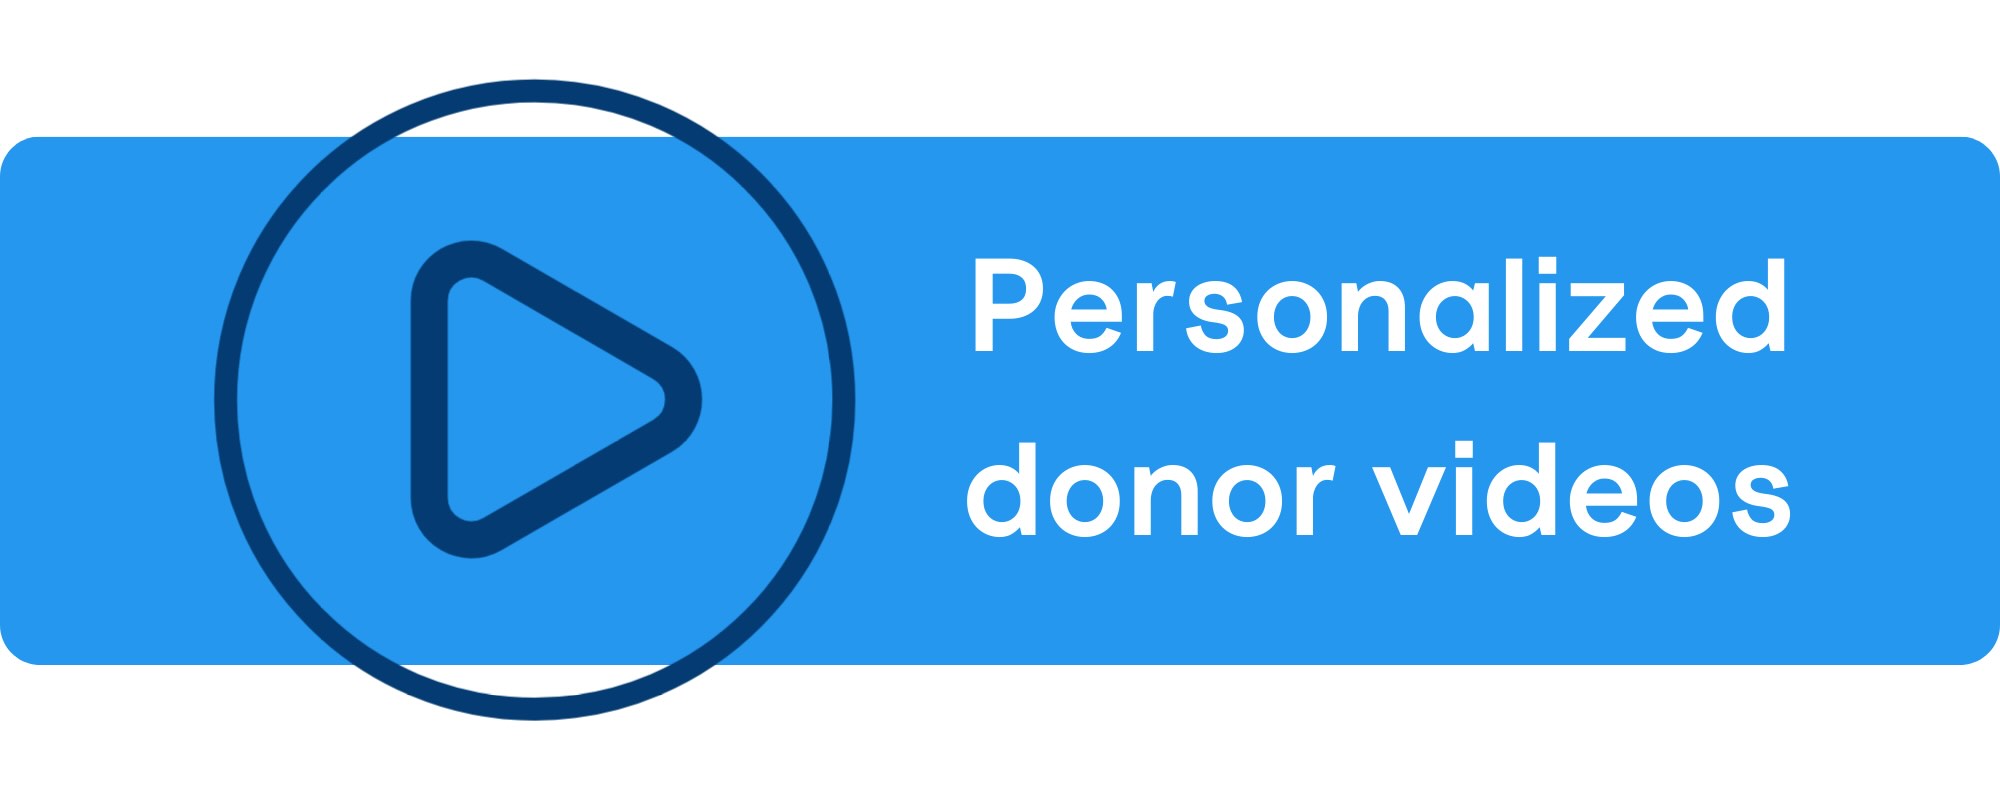 Personalized videos are a great way to send a donor thank you and make your church donors feel appreciated